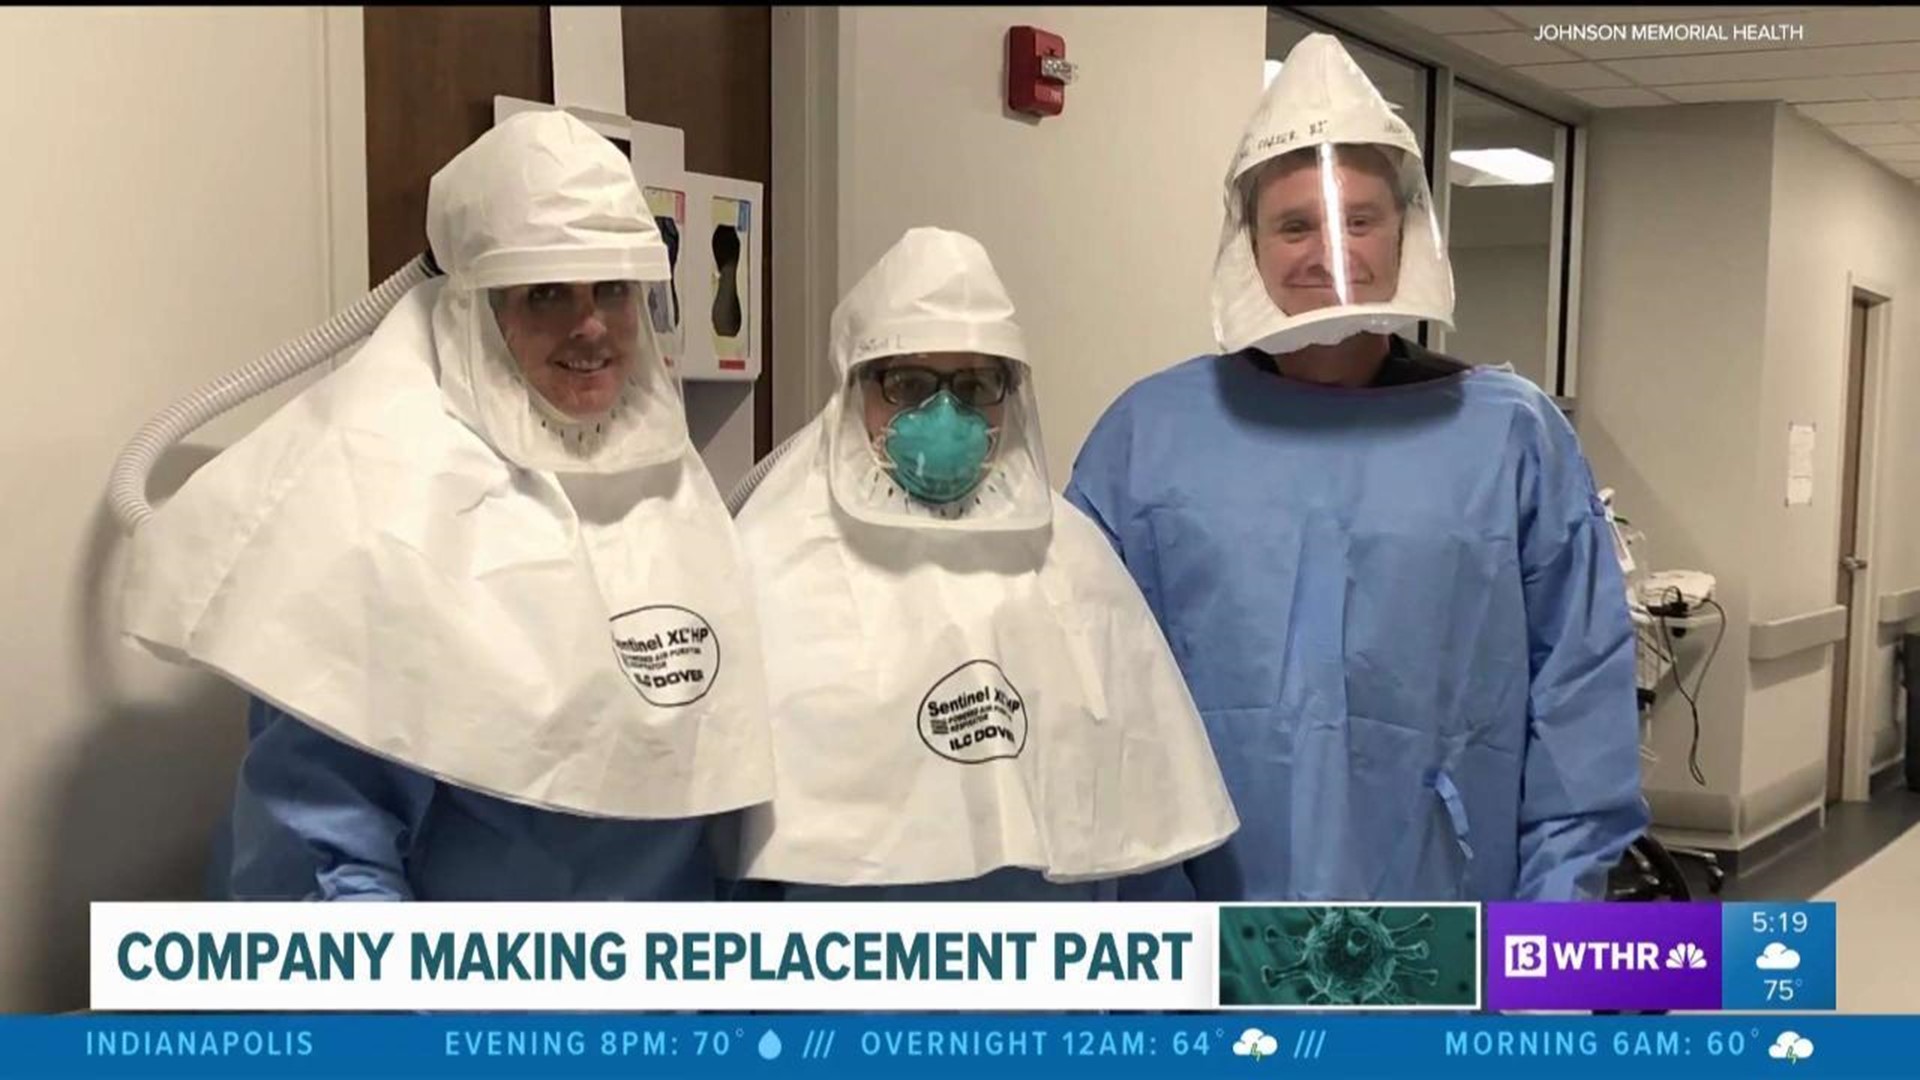 Company making replacement parts for health care workers